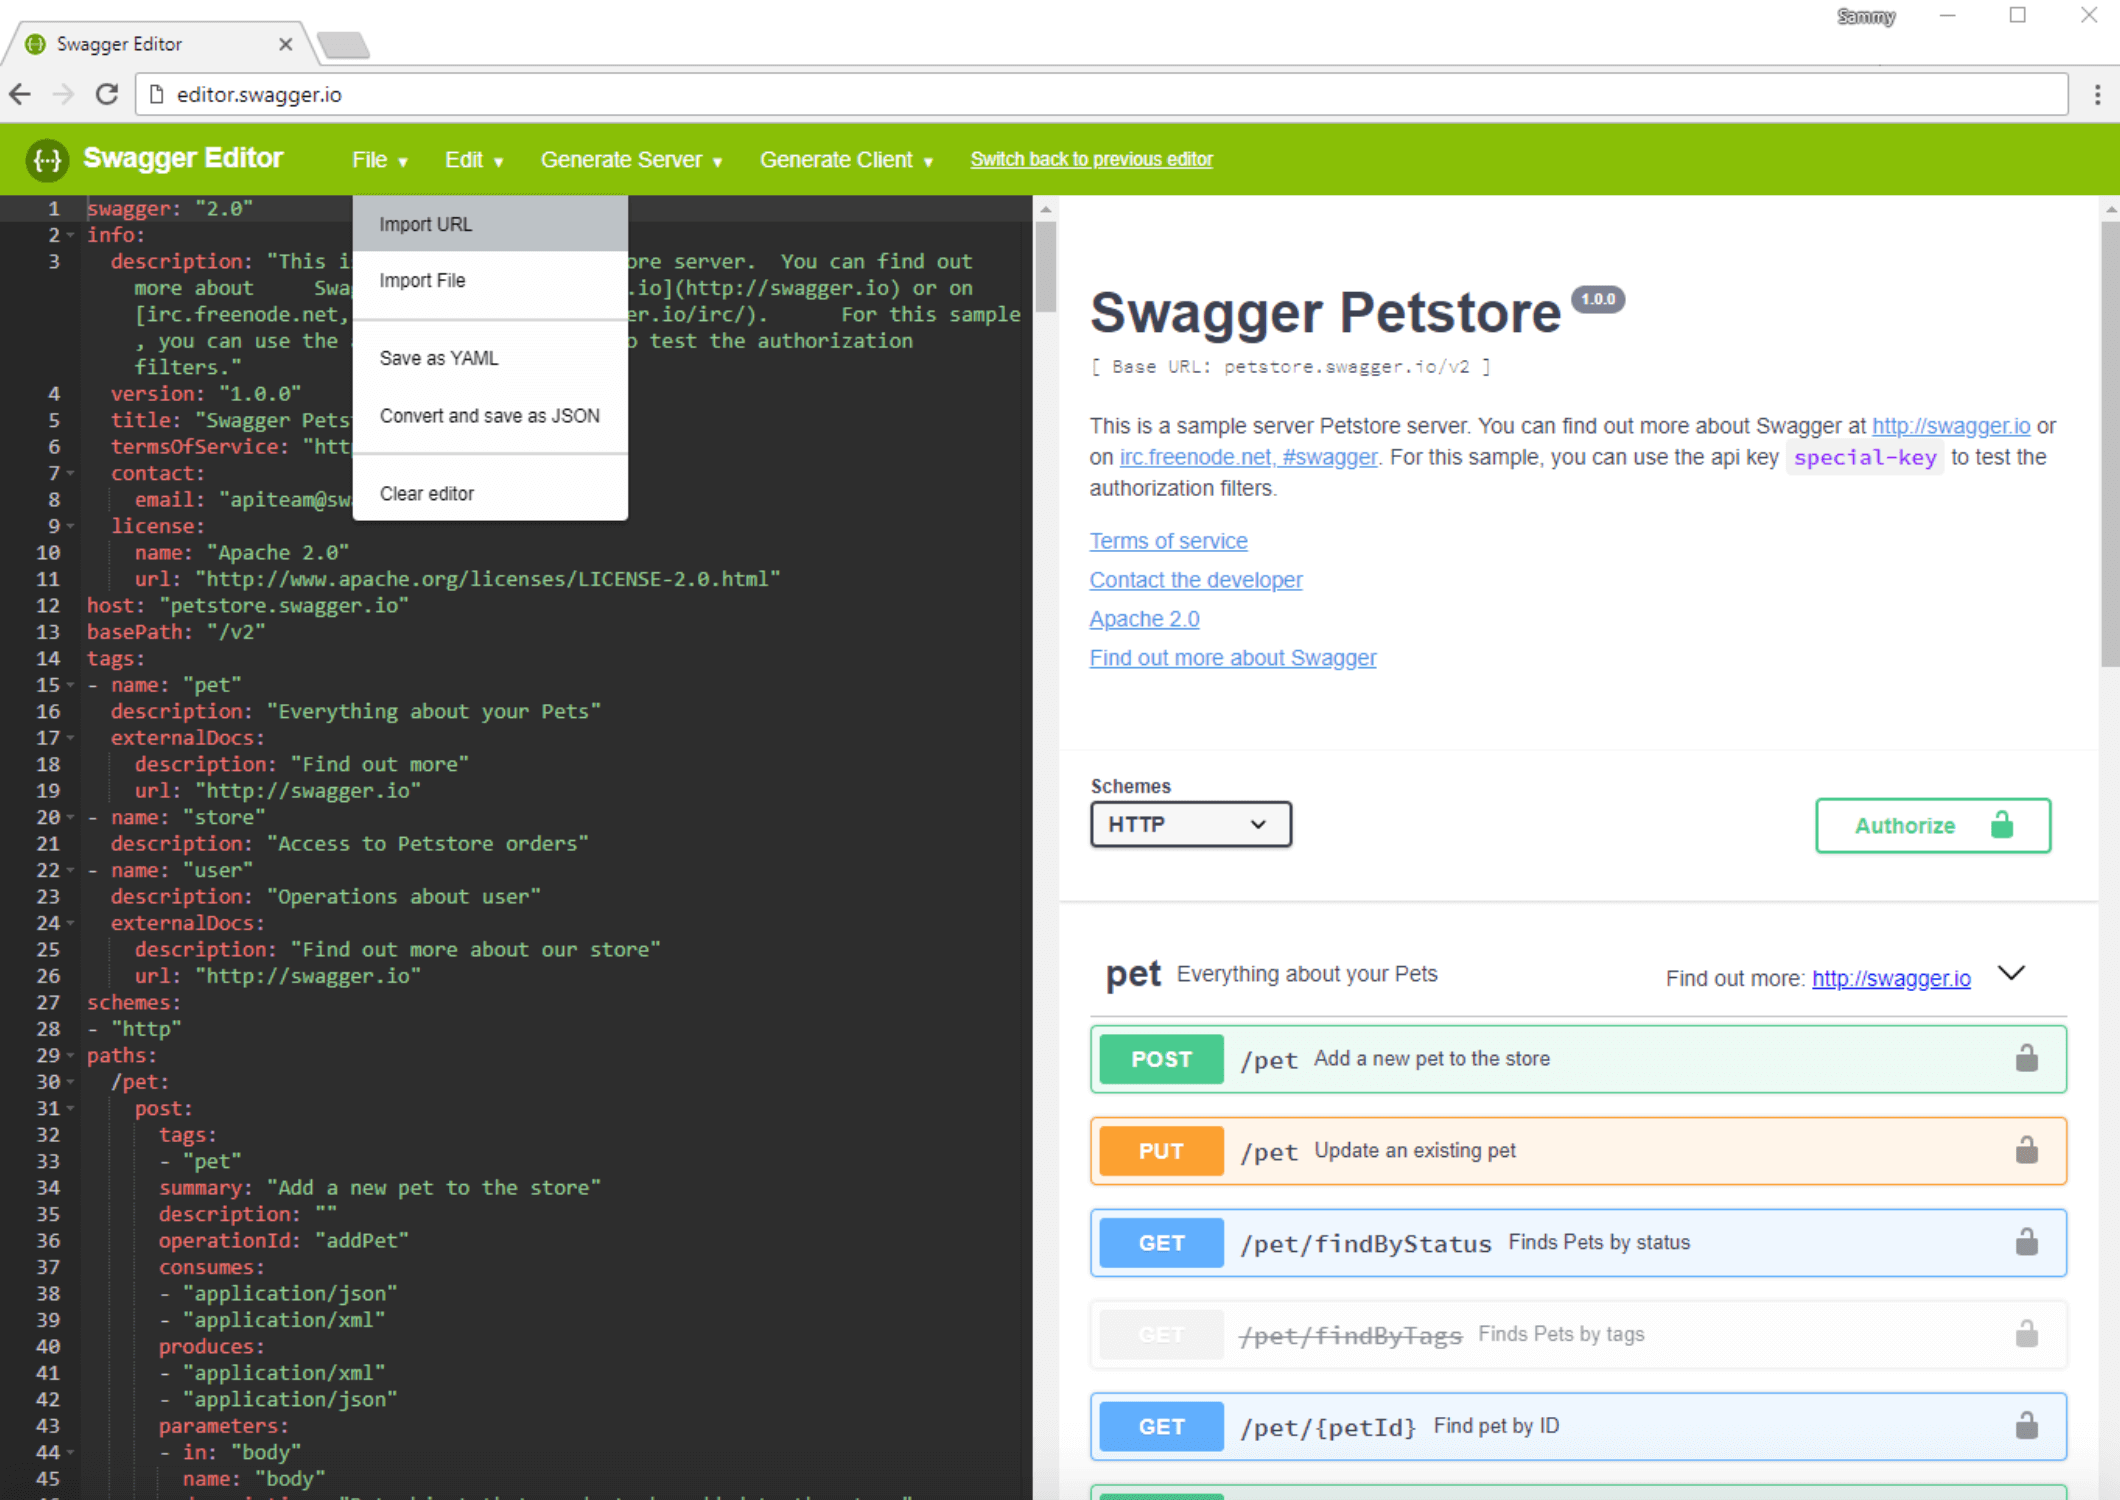 Swagger Editor Import URL